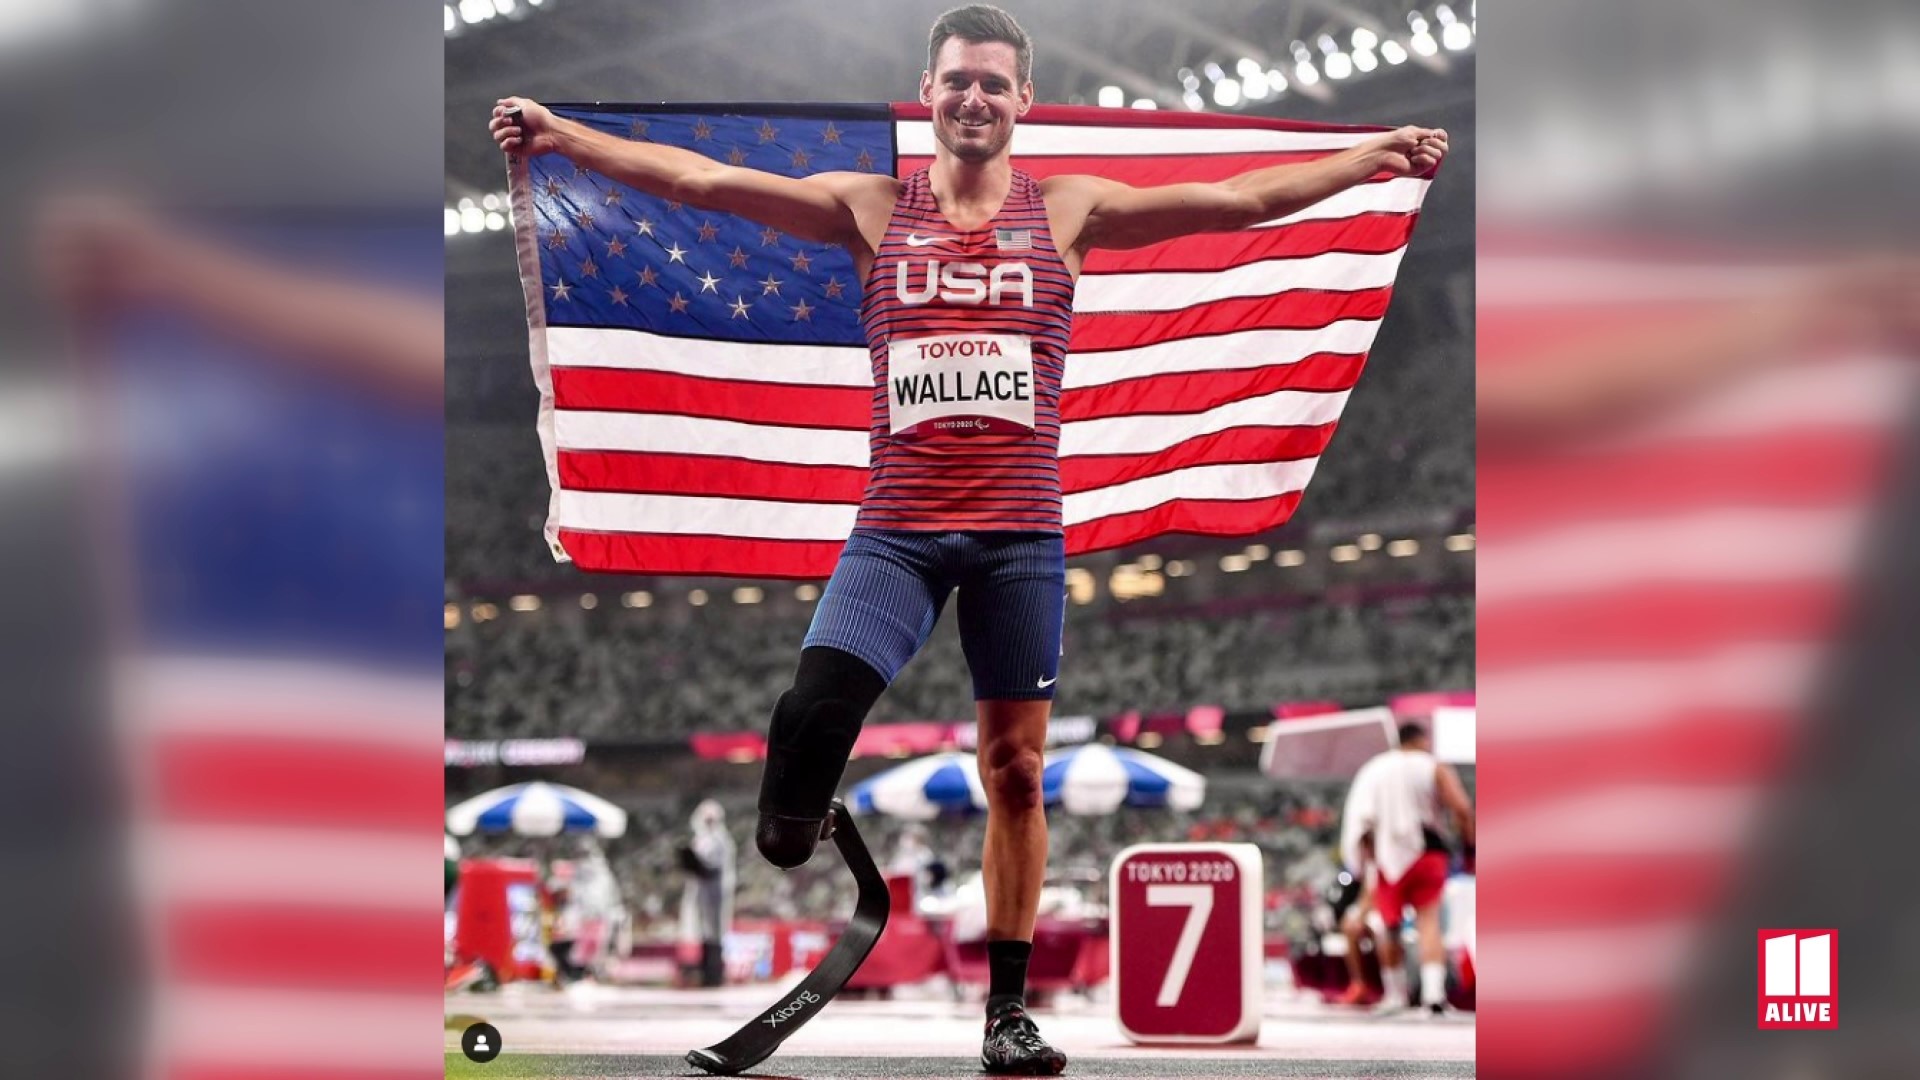 Team USA Paralympian in track and field, and UGA alum, Jarryd Wallace spoke with 11Alive's Cheryl Preheim about live since the Summer Games.